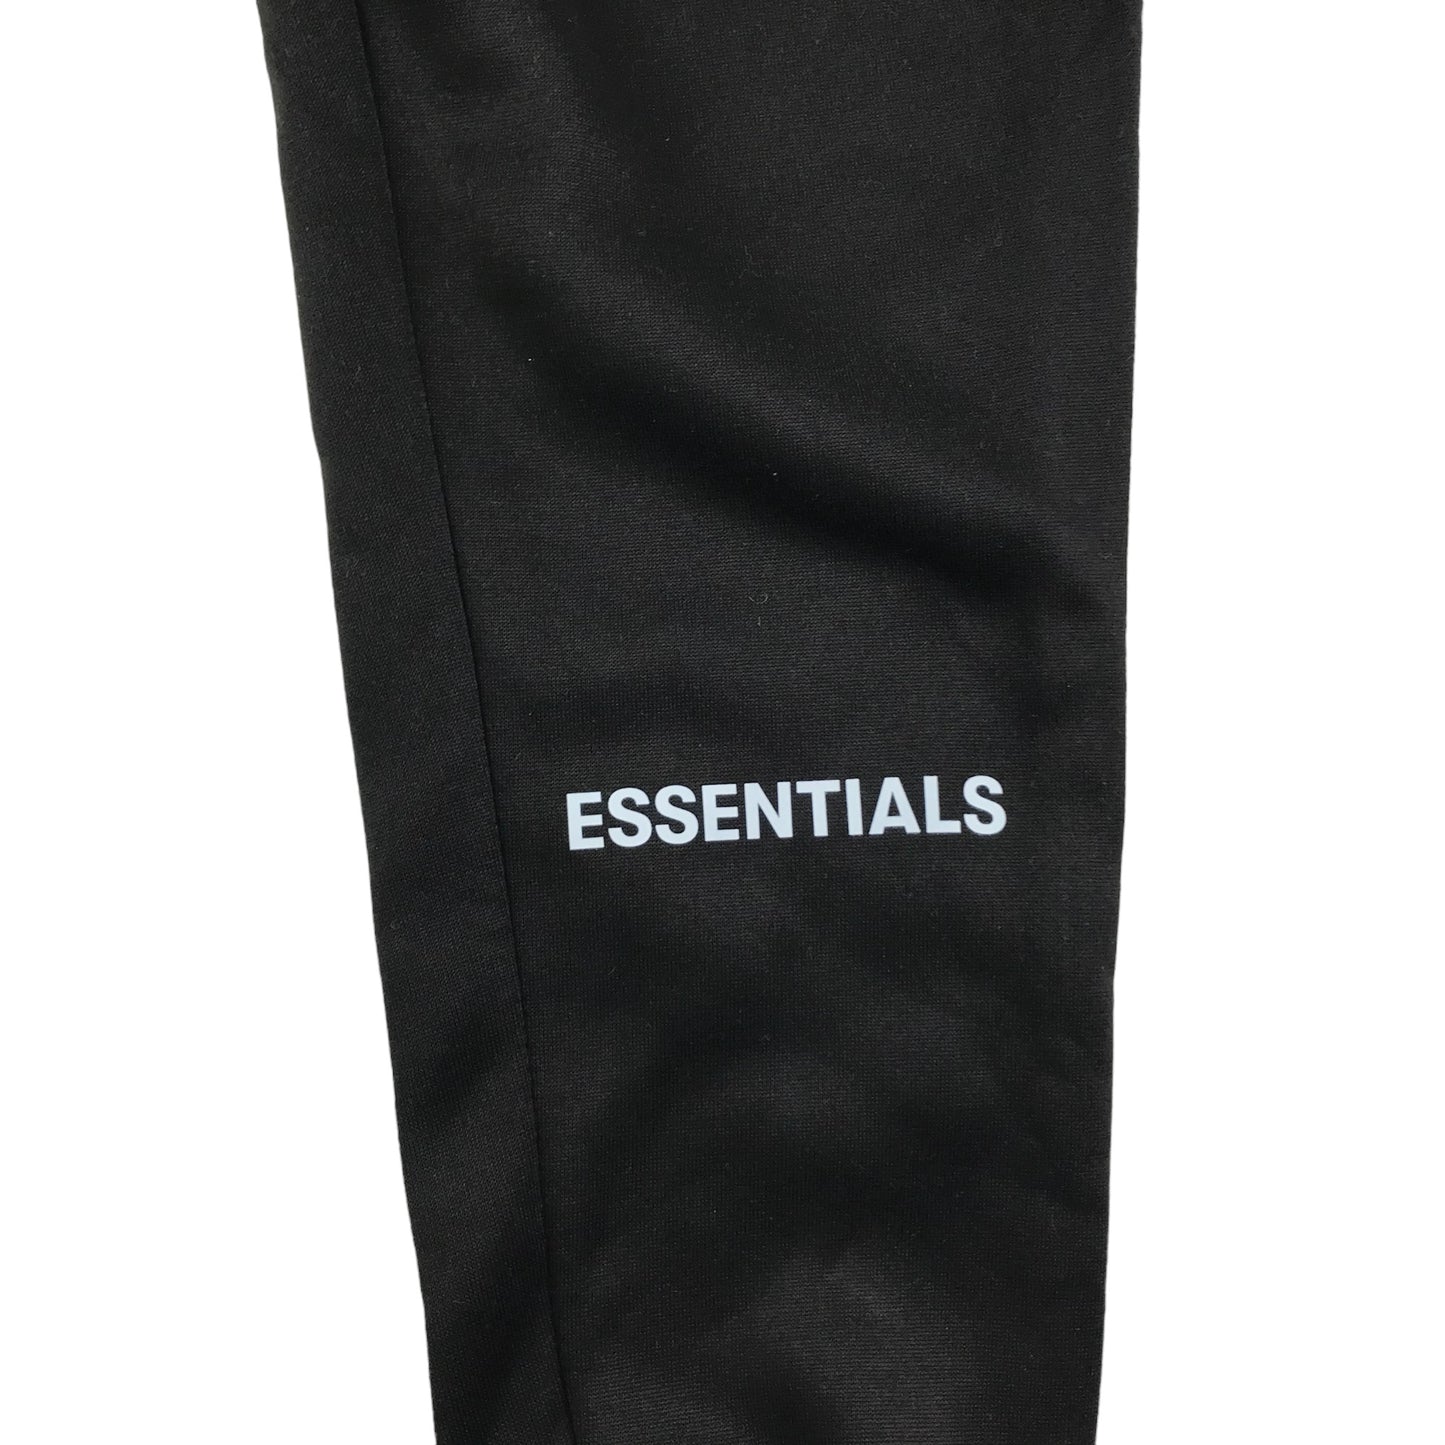 Hoodie and Joggers Set Size L Black with word Essentials Printed